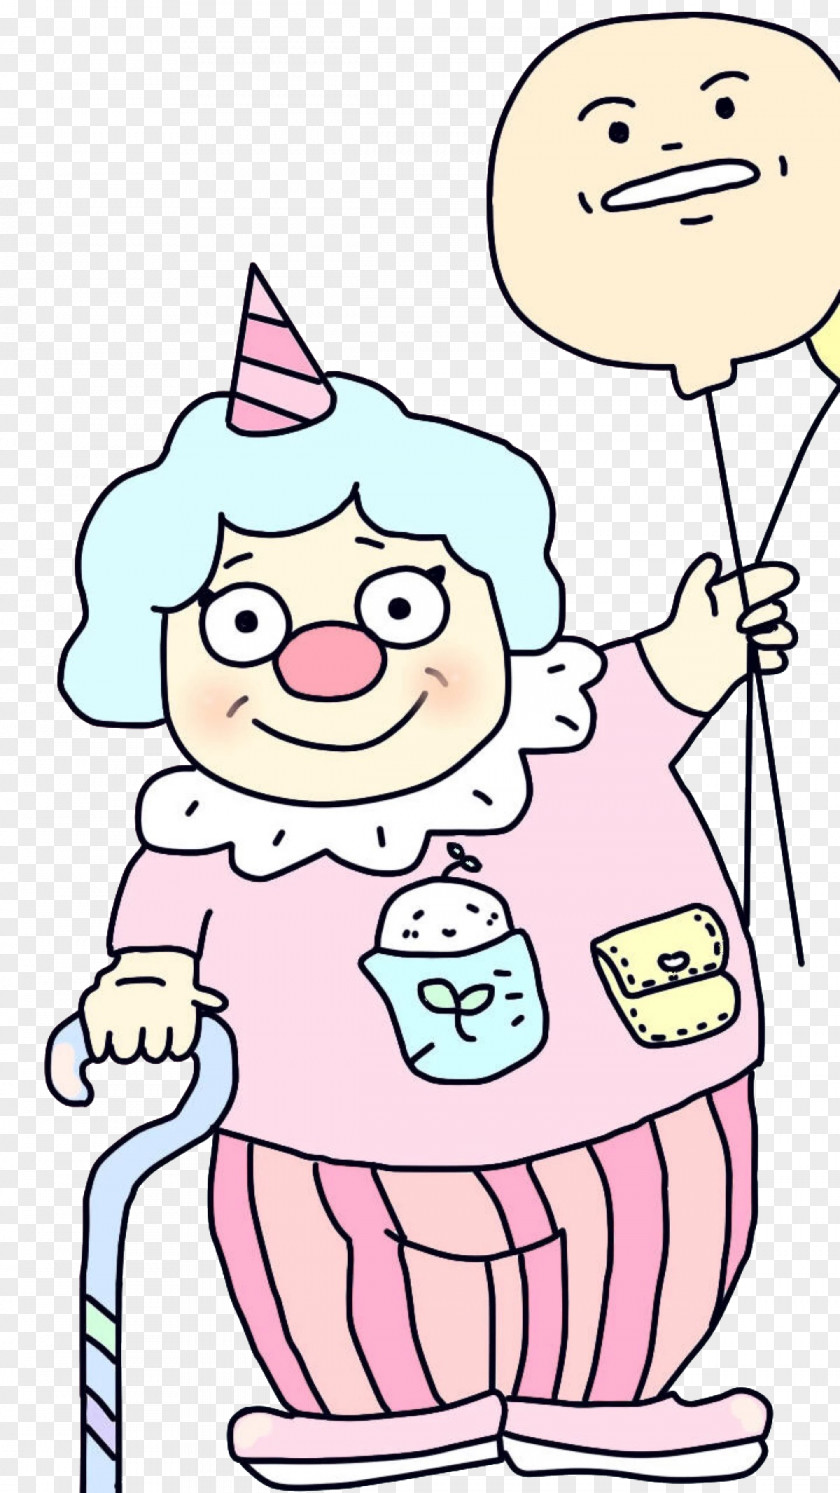 Holding A Balloon Clown Drawing PNG